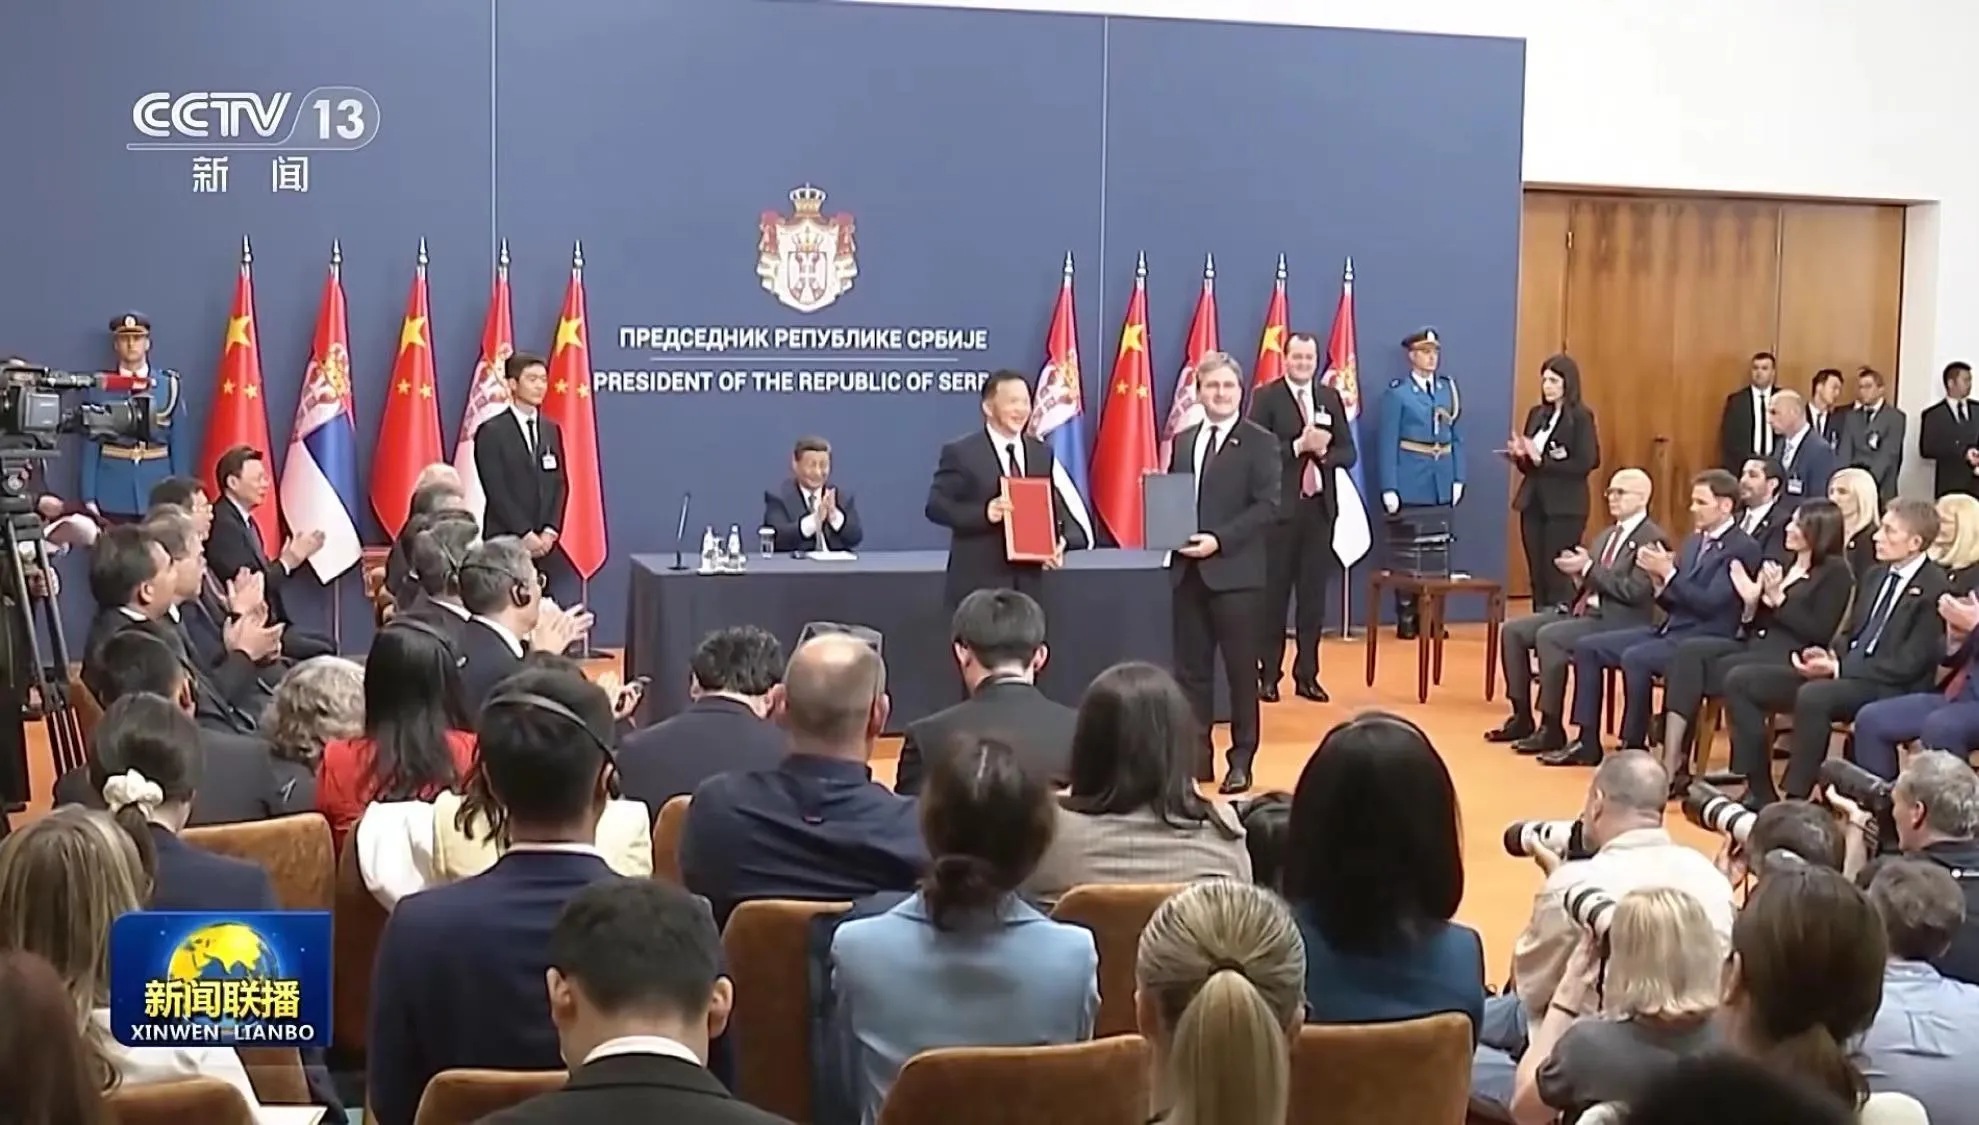 The moment of Xi Jinping’s visit to Europe｜The code for forging the “steel pole” friendship between China and Serbia